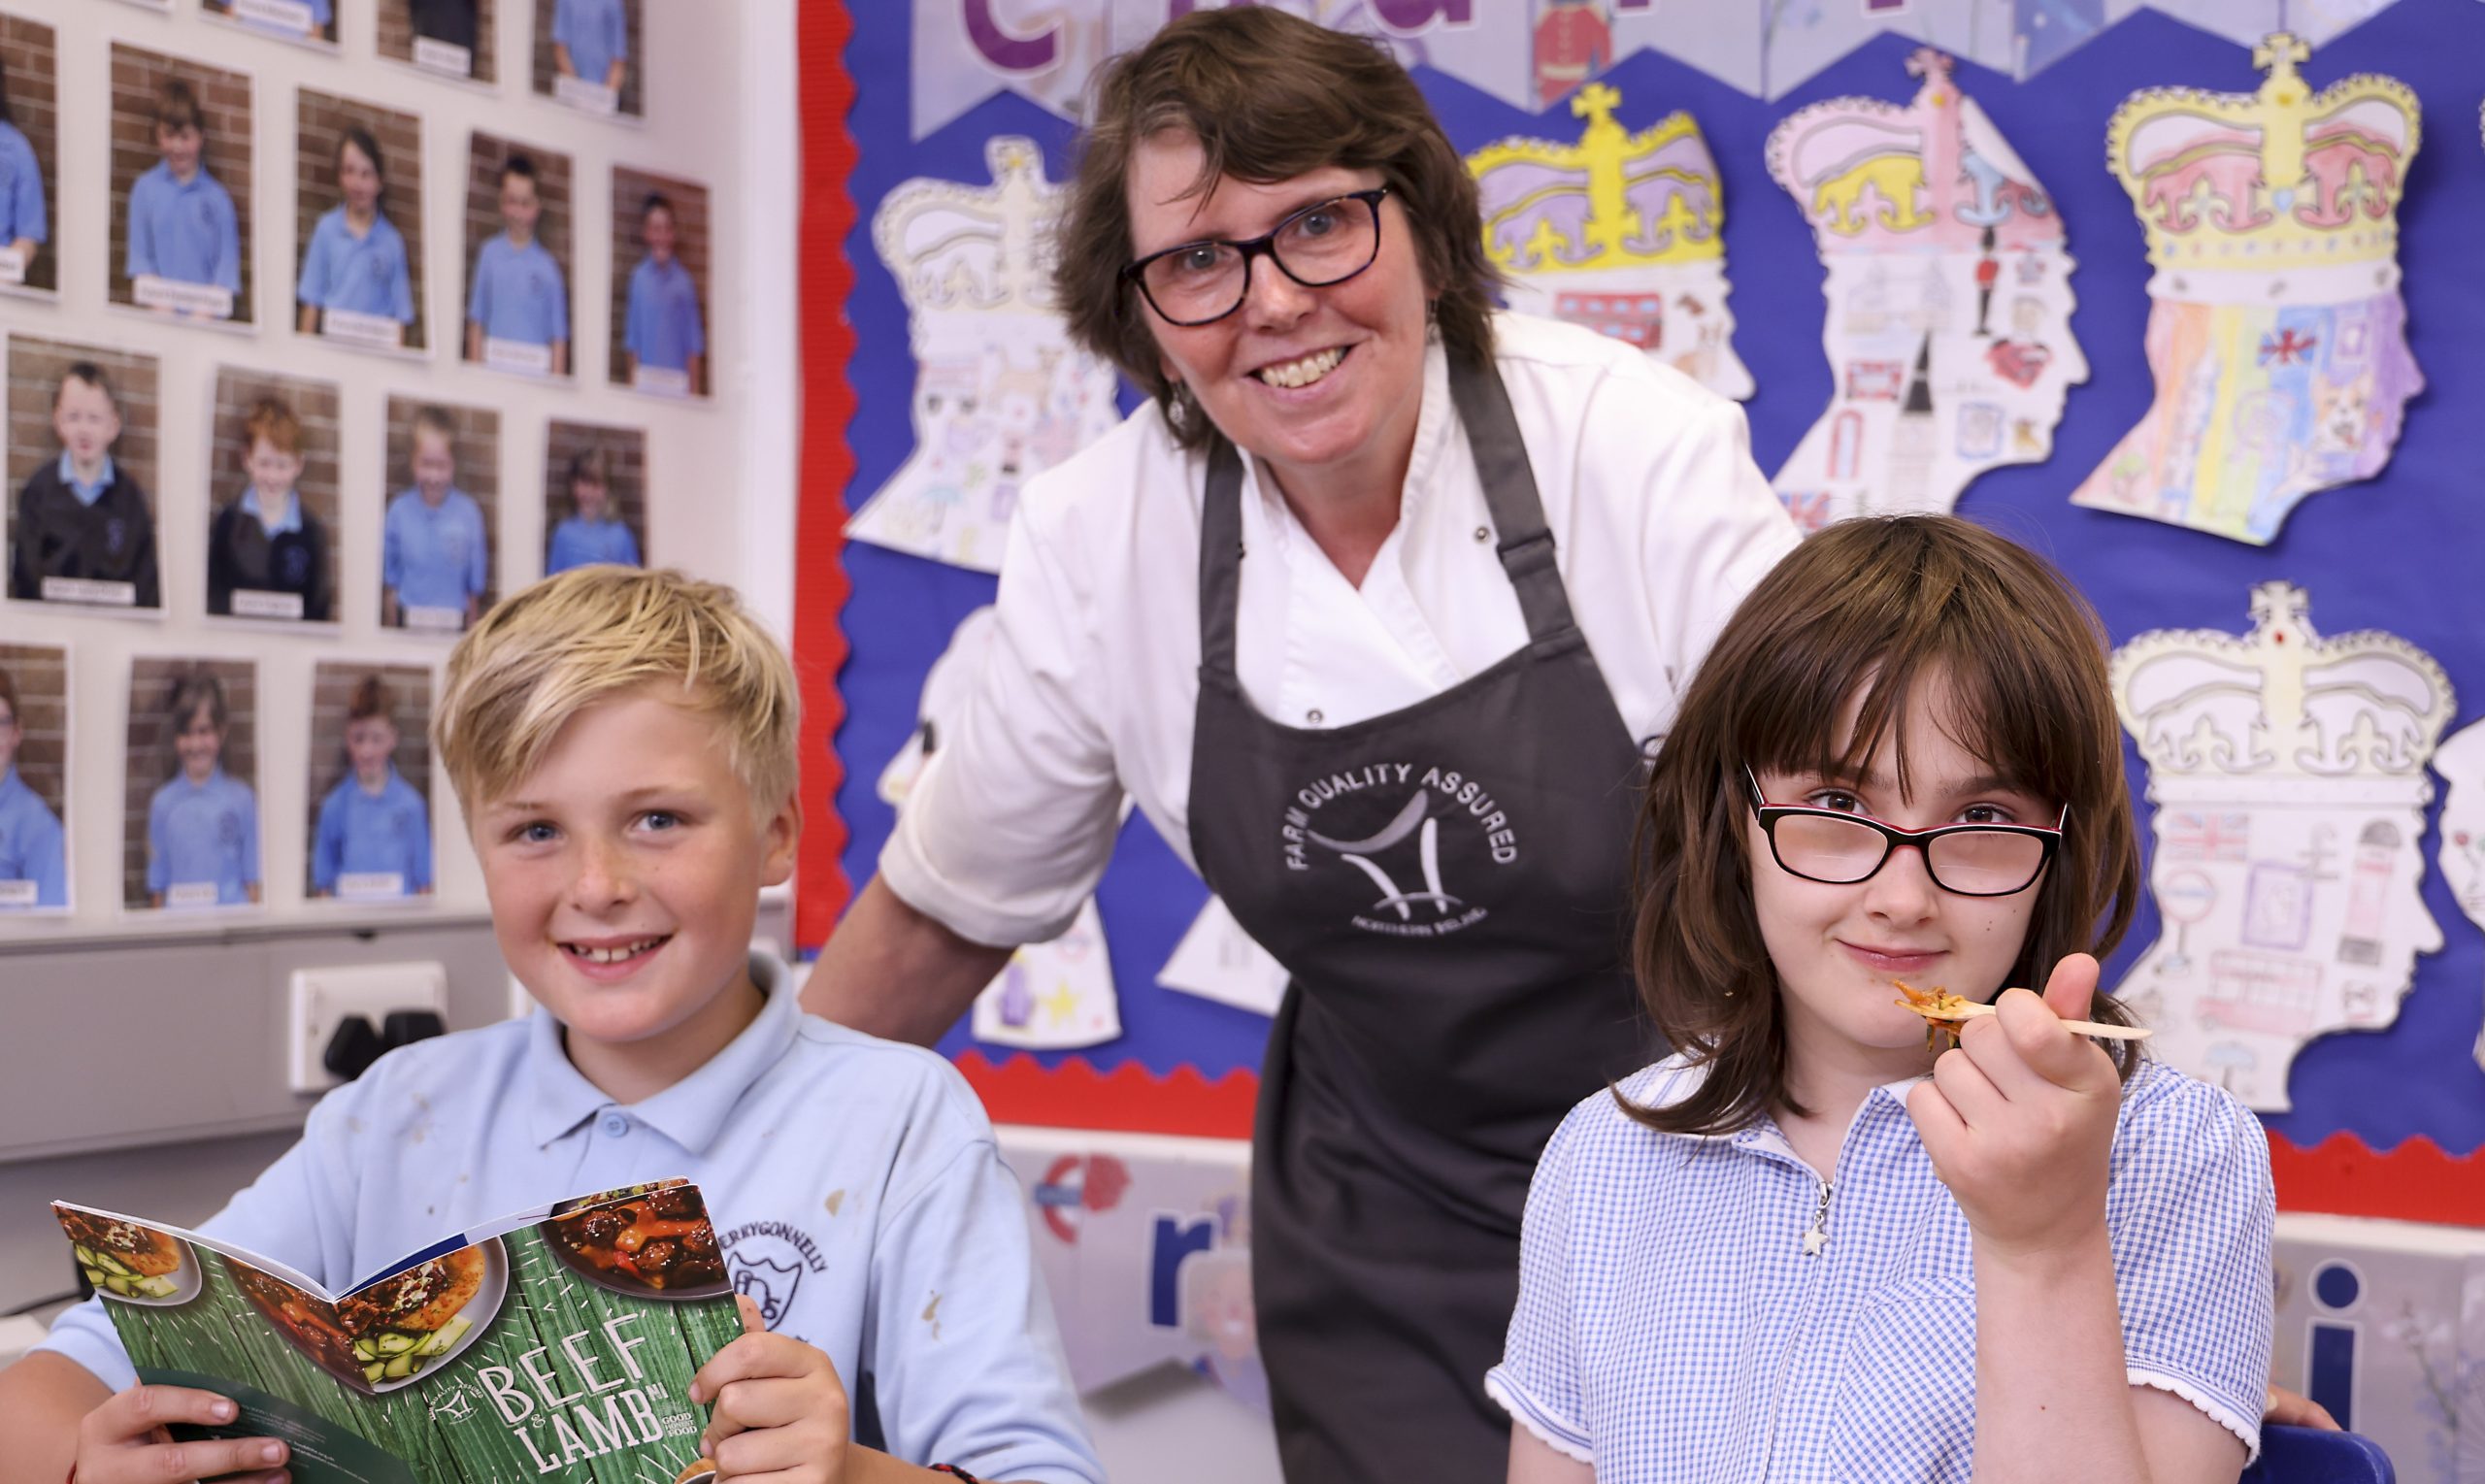 Over 2,300 pupils participate in LMC cookery demonstrations